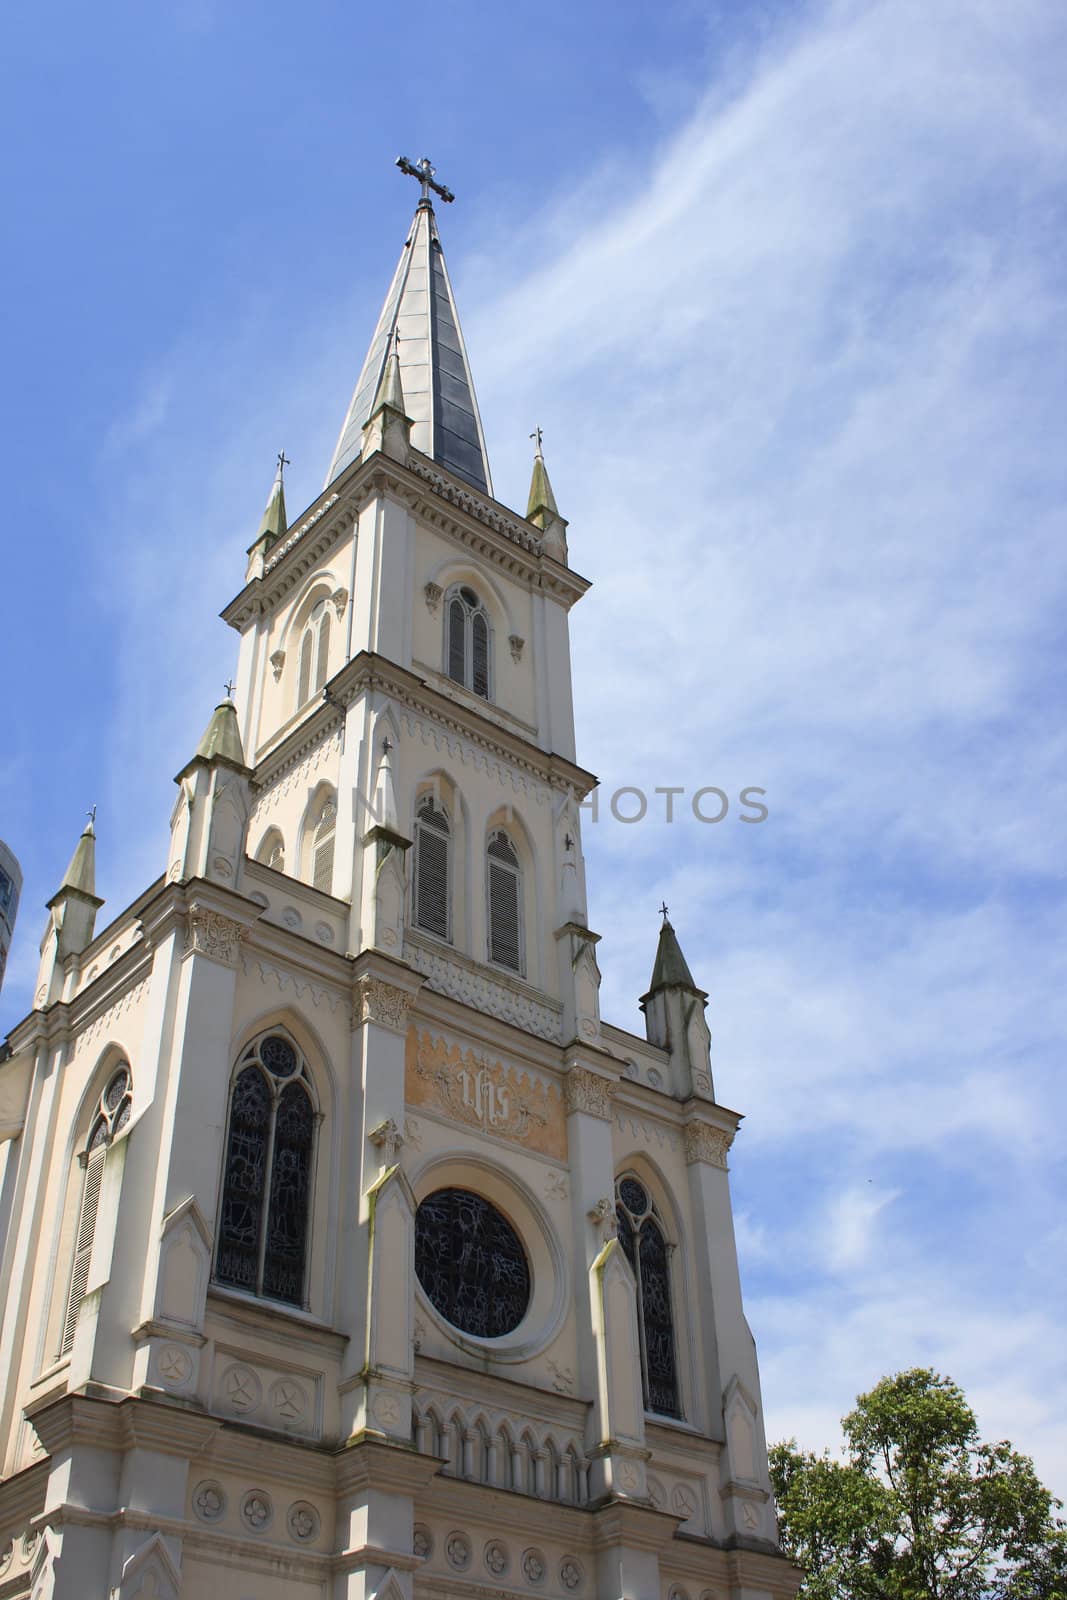 Chijmes in Singapore, a famous British colonial style cathedral church. 